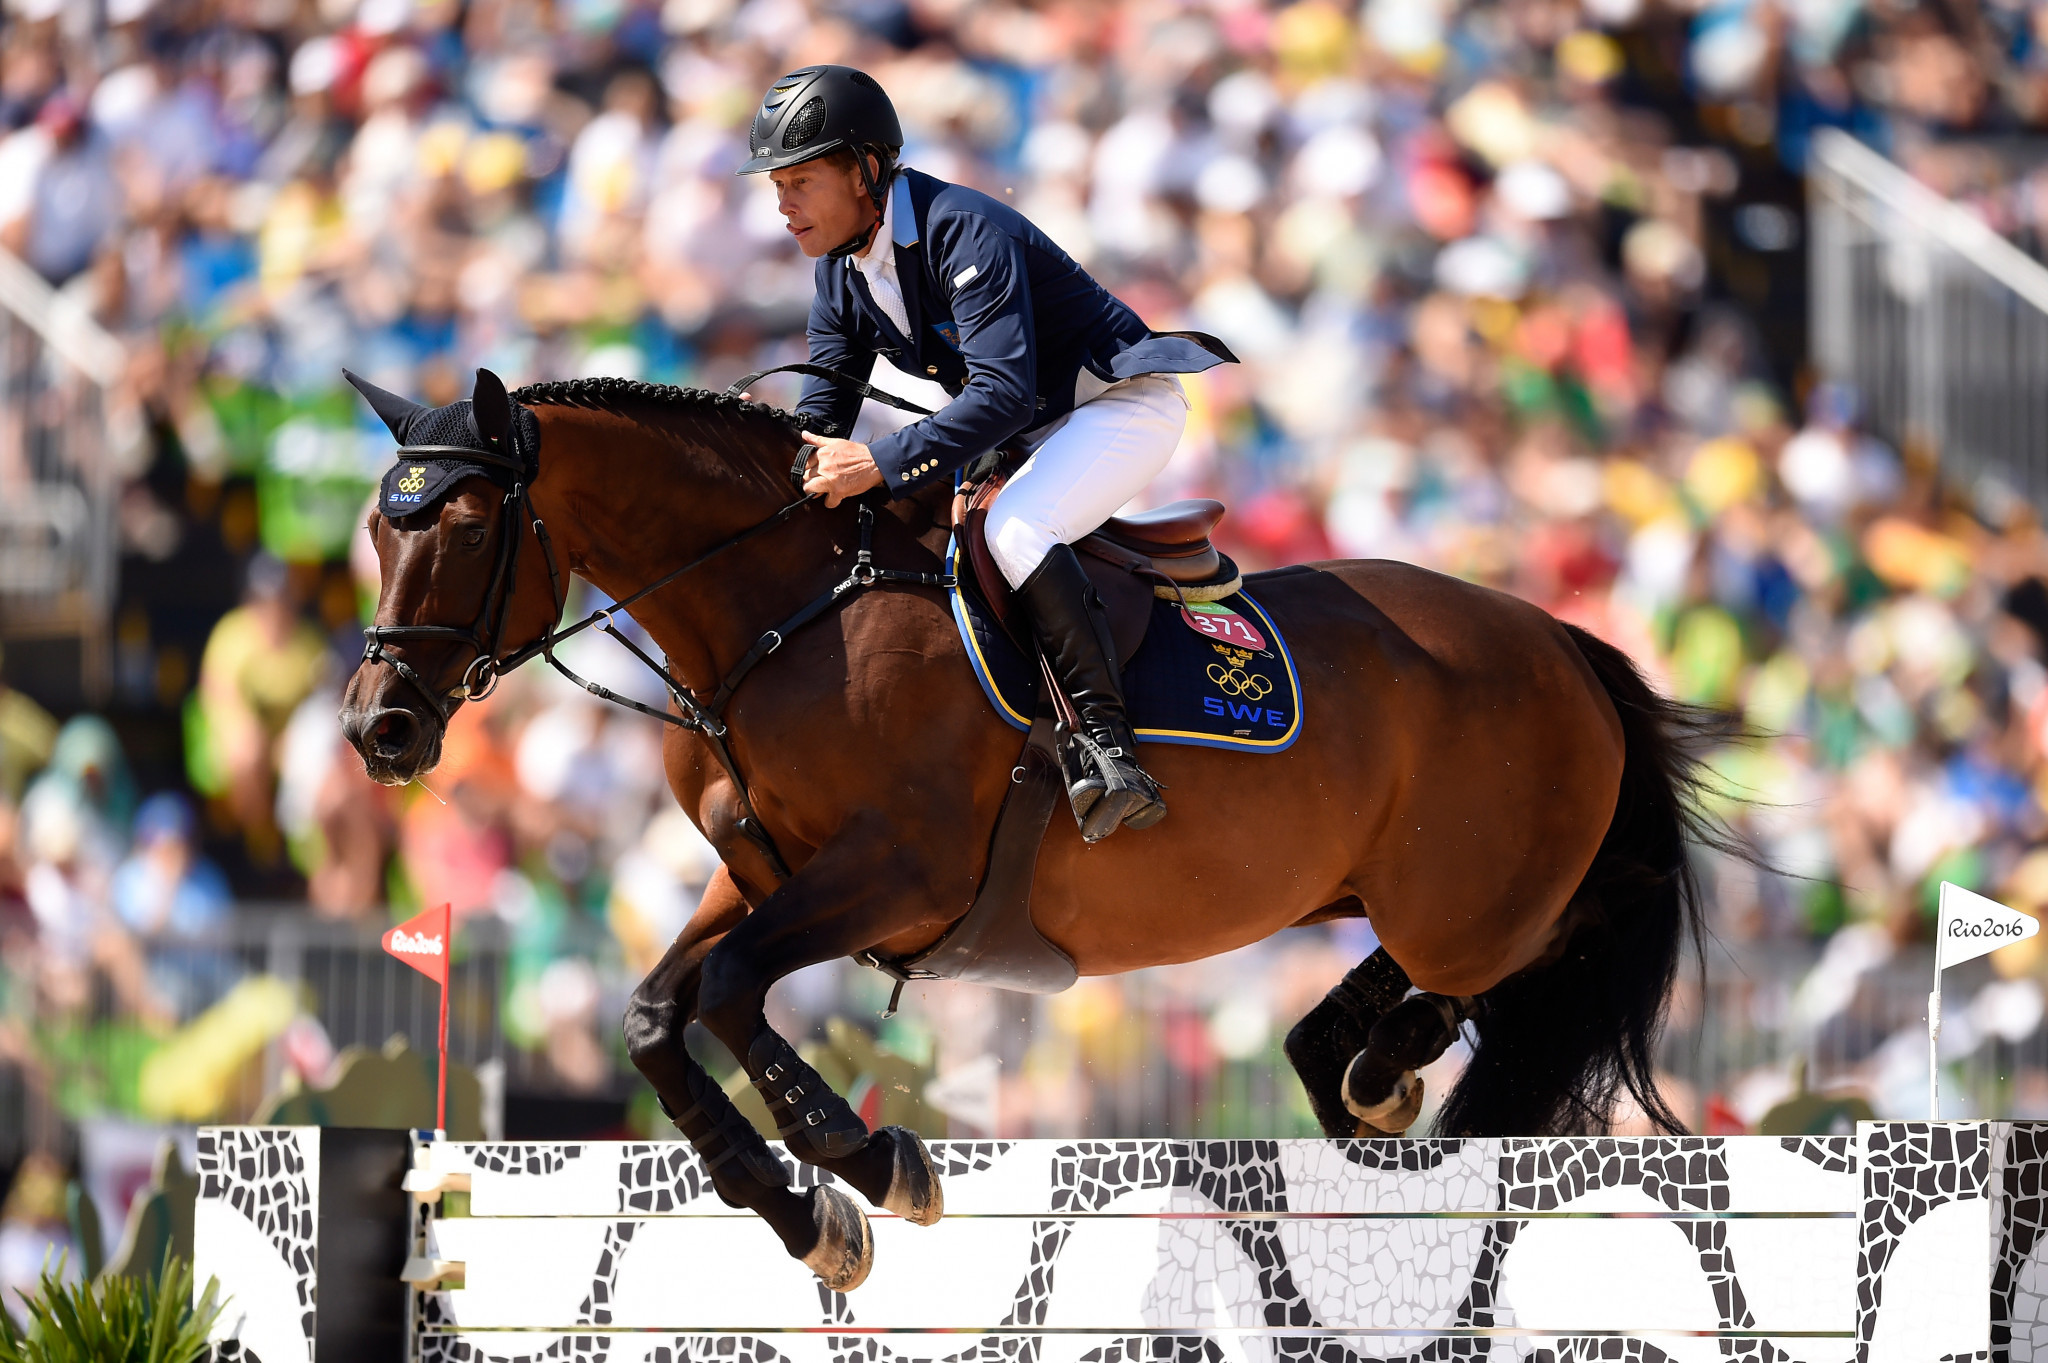 Bengtsson earns opening win for Sweden in jump-off at Jumping Nations Cup in St Gallen